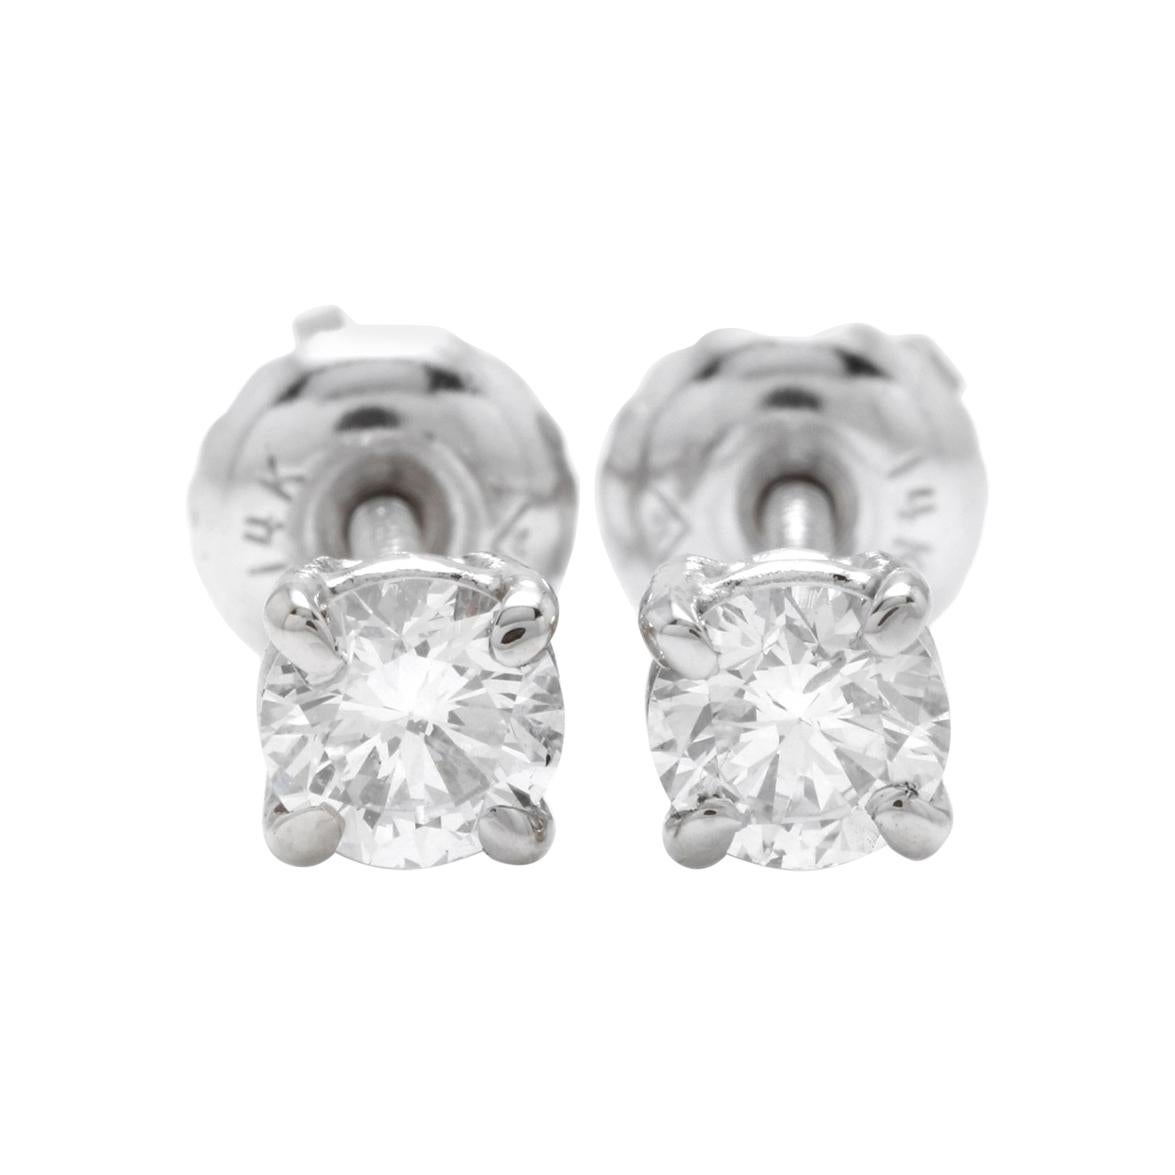 Exquisite 0.50 Carat Natural Diamond 14 Karat Solid White Gold Stud Earrings For Sale